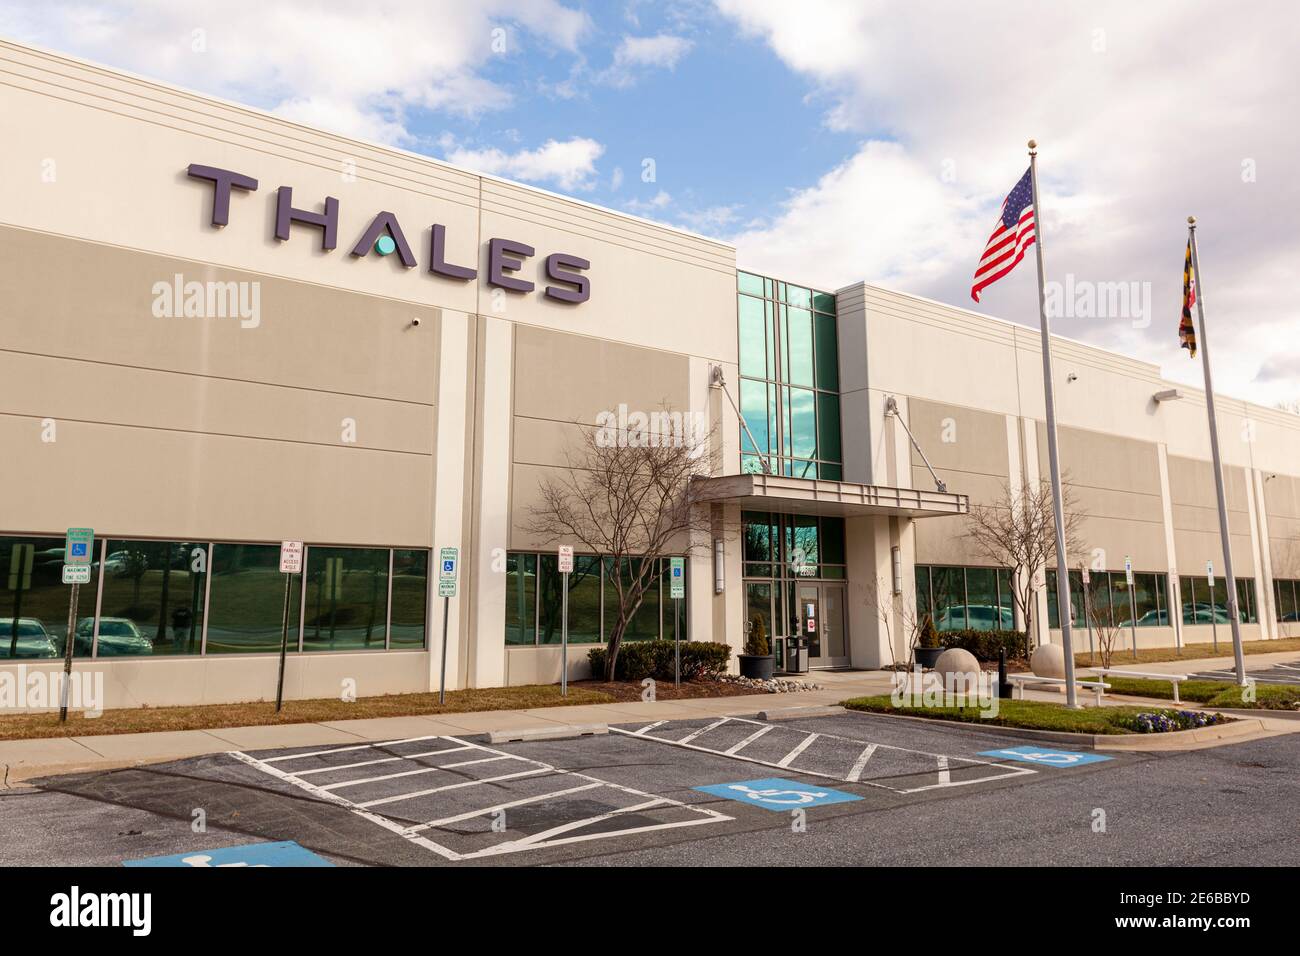 Clarksburg, MD, USA 01-22-2021: US Headquarters of French defense, security and aerospace company Thales Group. They produce high tech military and ci Stock Photo